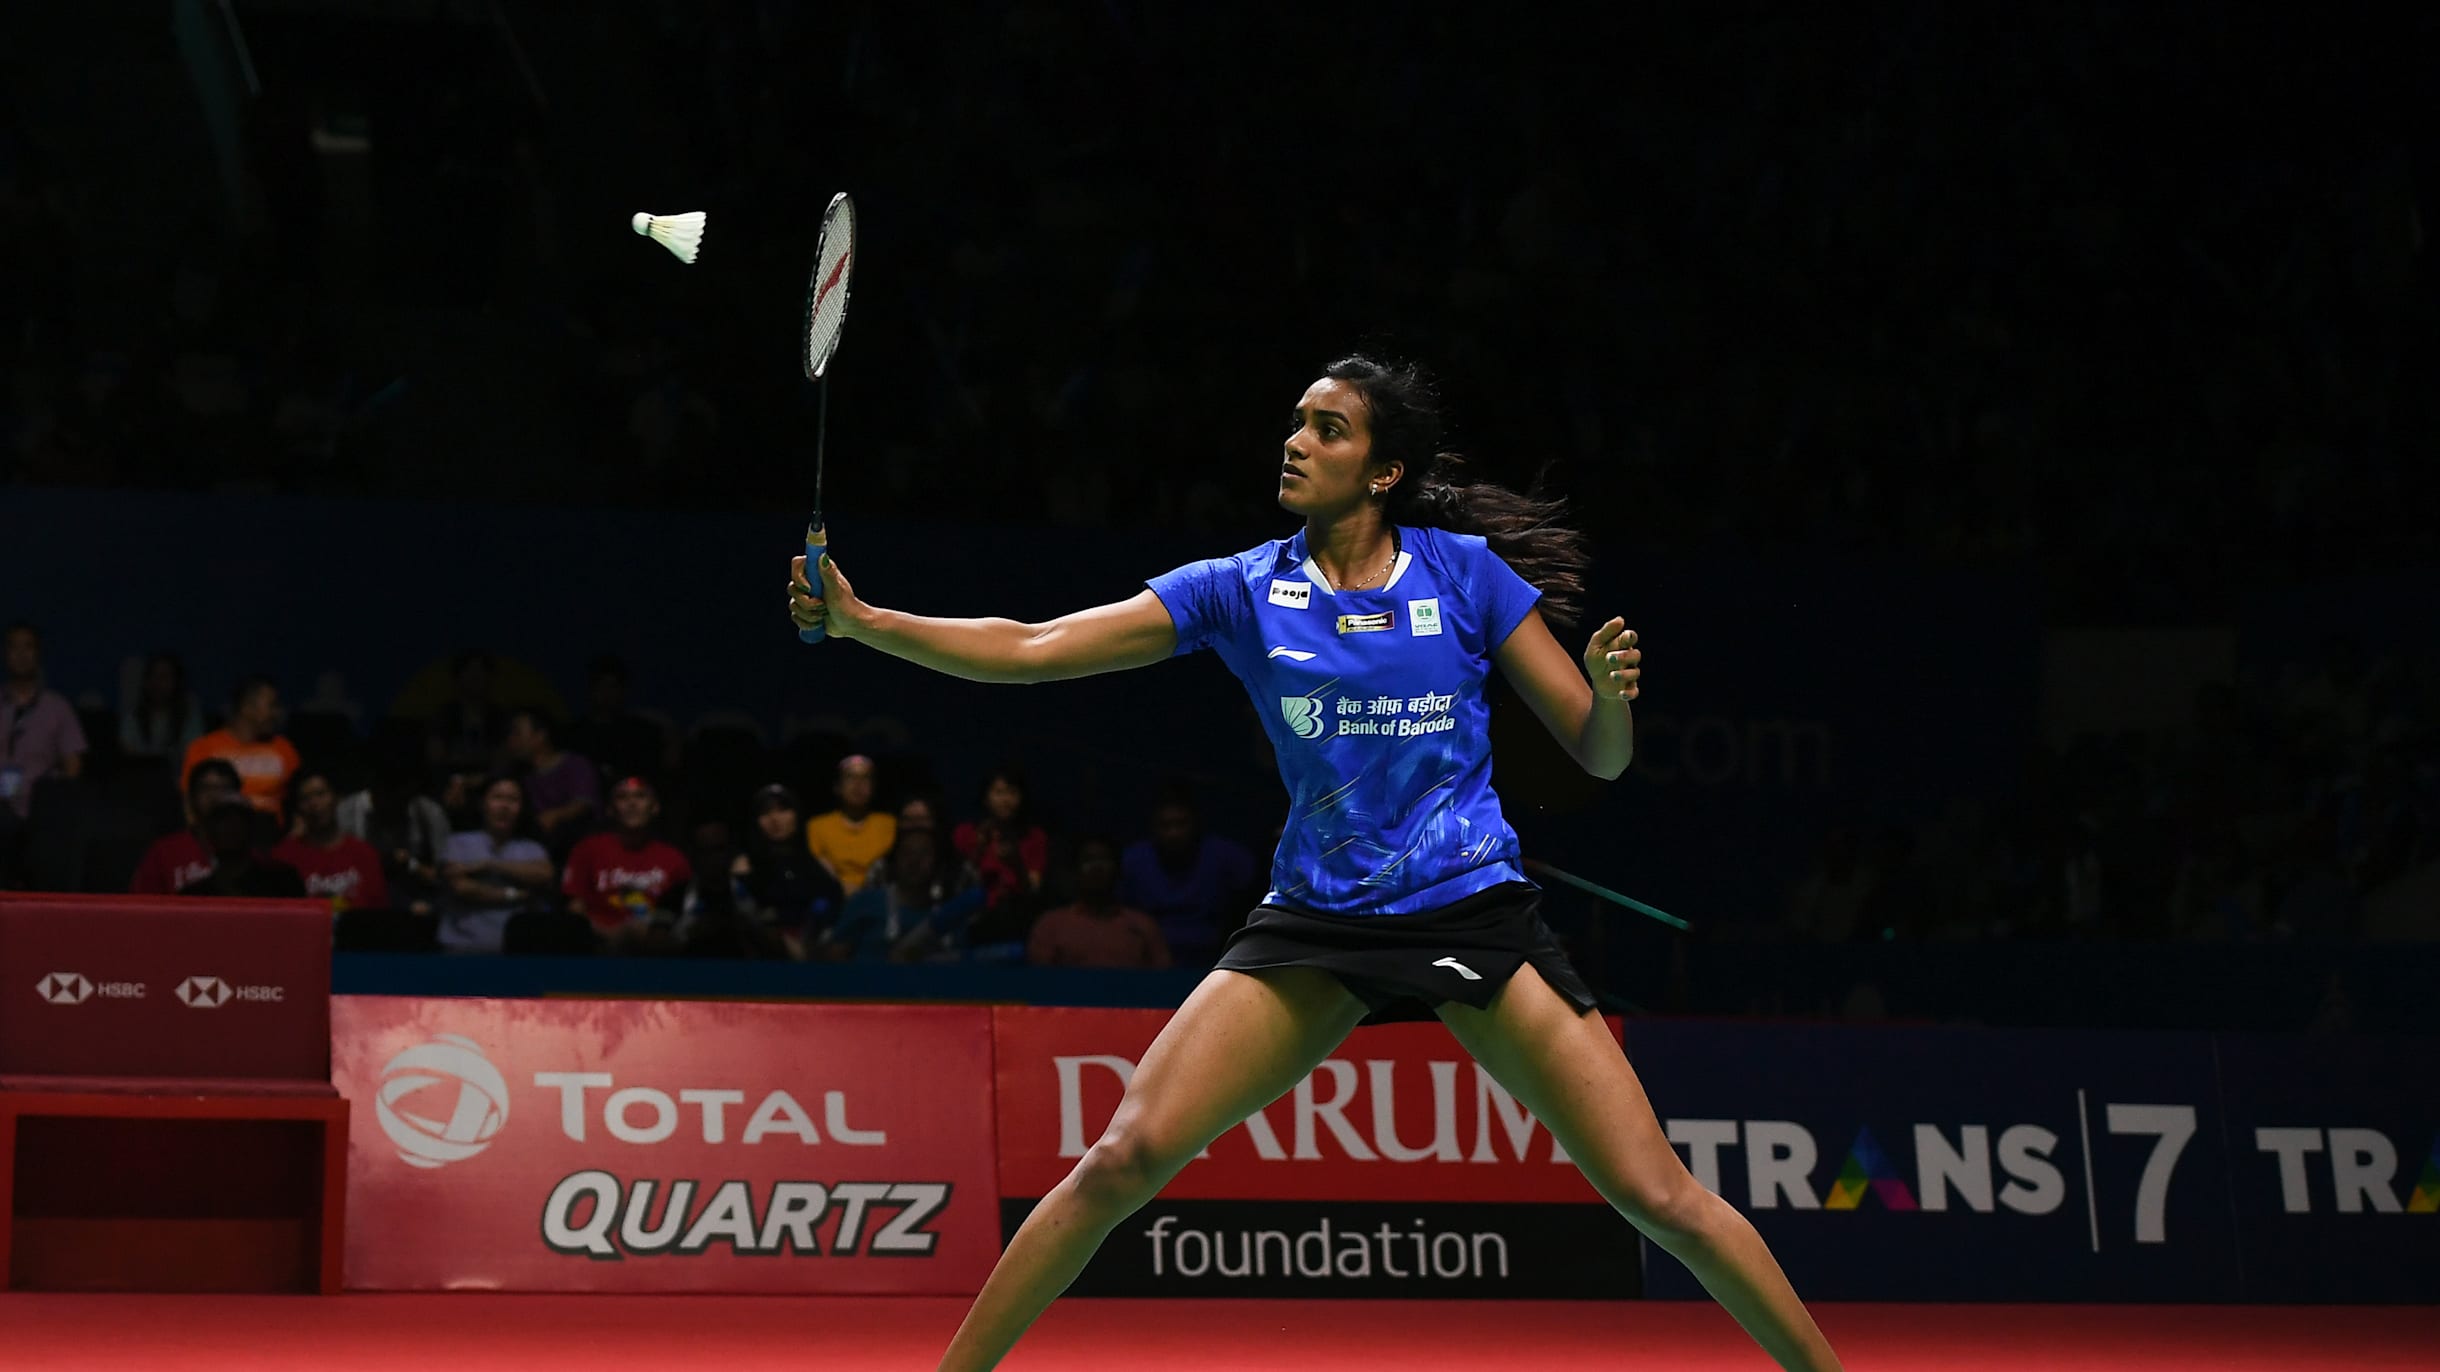 2019 BWF World Tour Finals Preview, where to watch and more